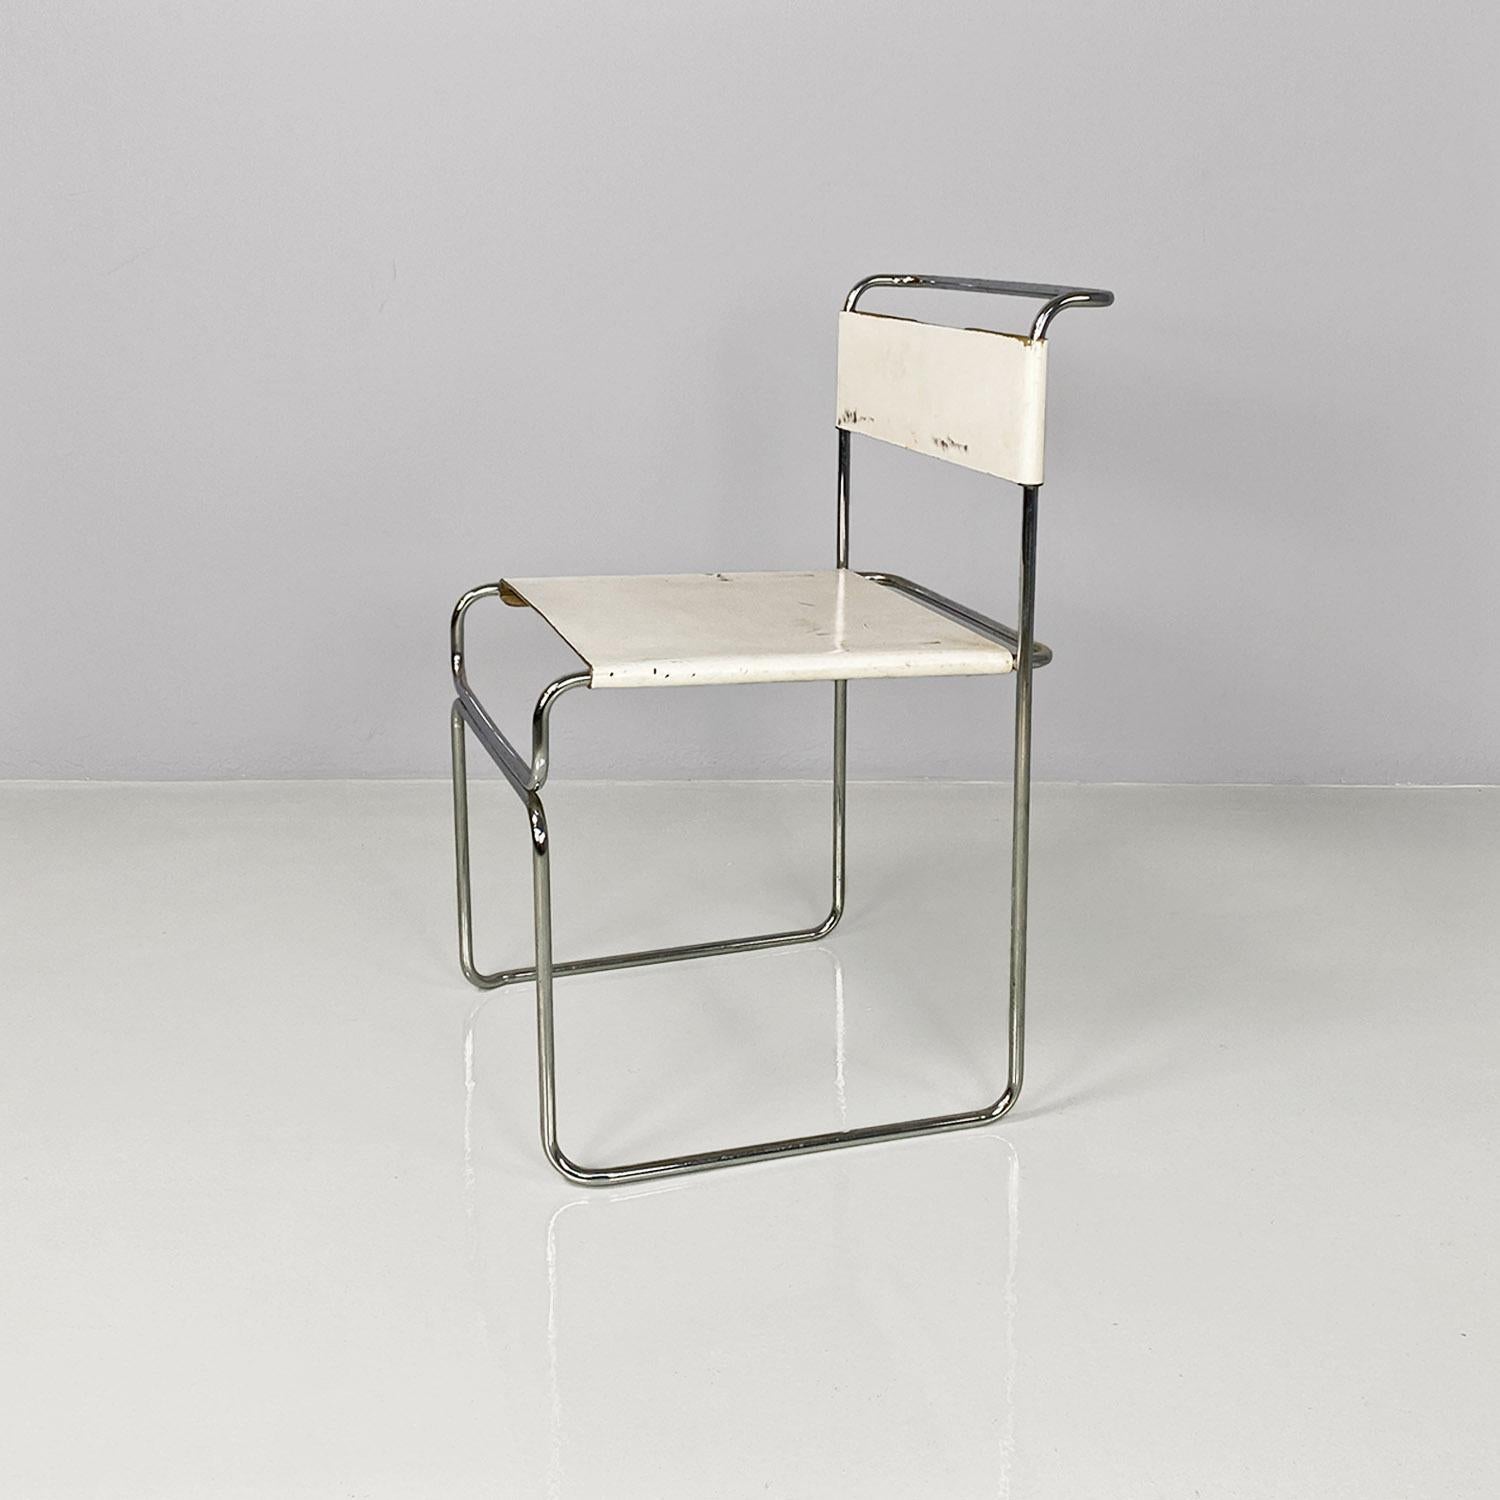 Italian modern chromed metal and white leather Libellula chair designed by Giovanni Carini and produced by Planula in 1970s.
Libellula model chair, stackable, with metal rod structure and seat and back in white leather.
Produced by Planula in